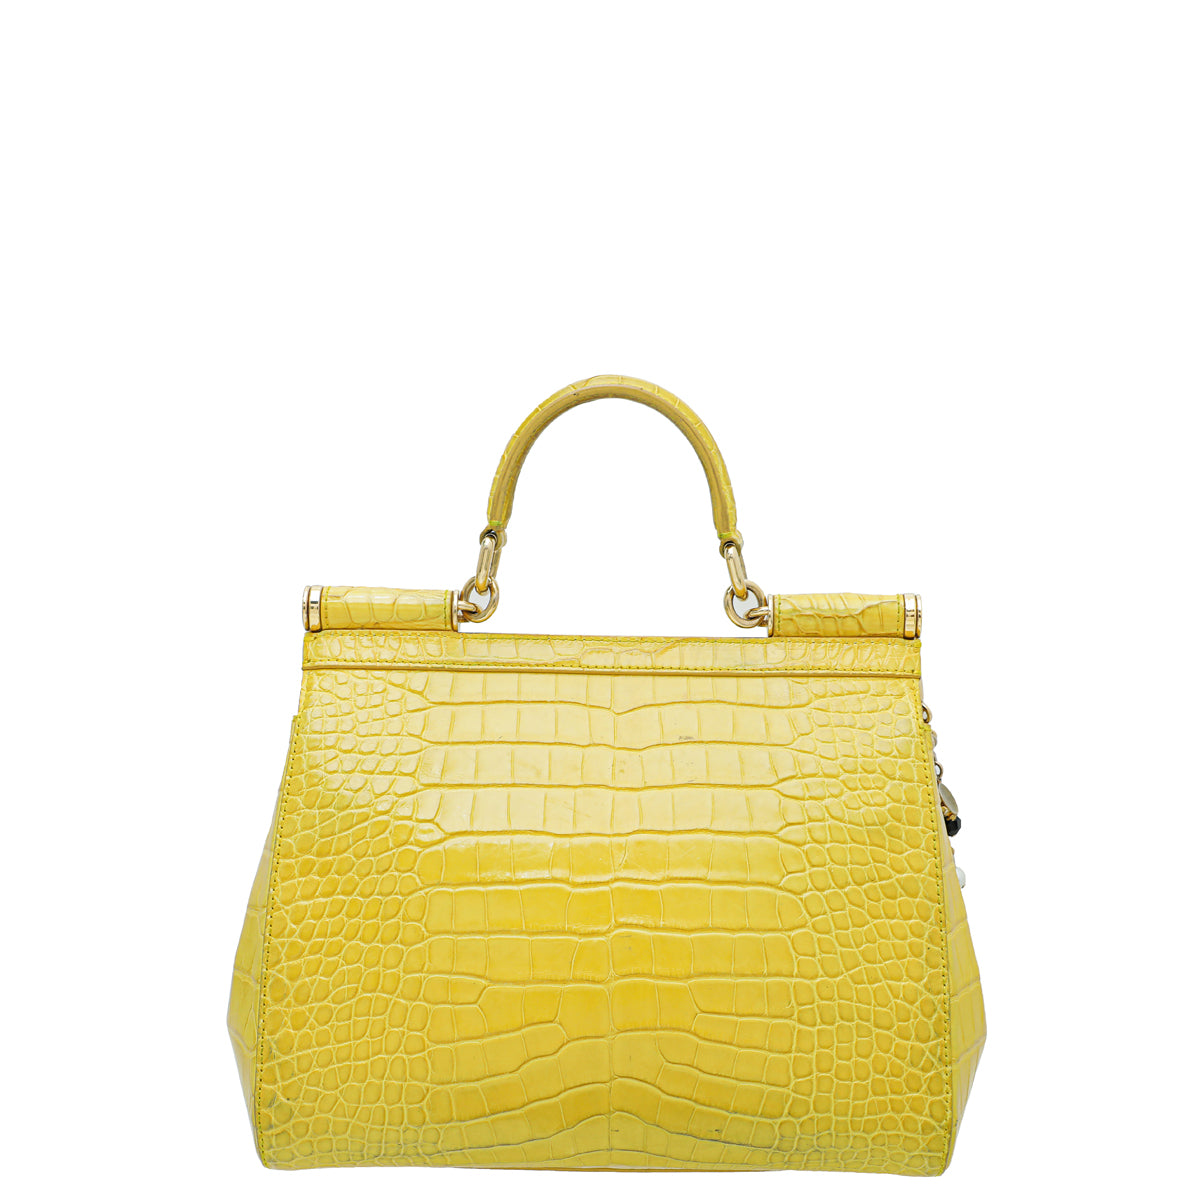 Dolce & Gabbana 'sicily Small' Shoulder Bag in Yellow